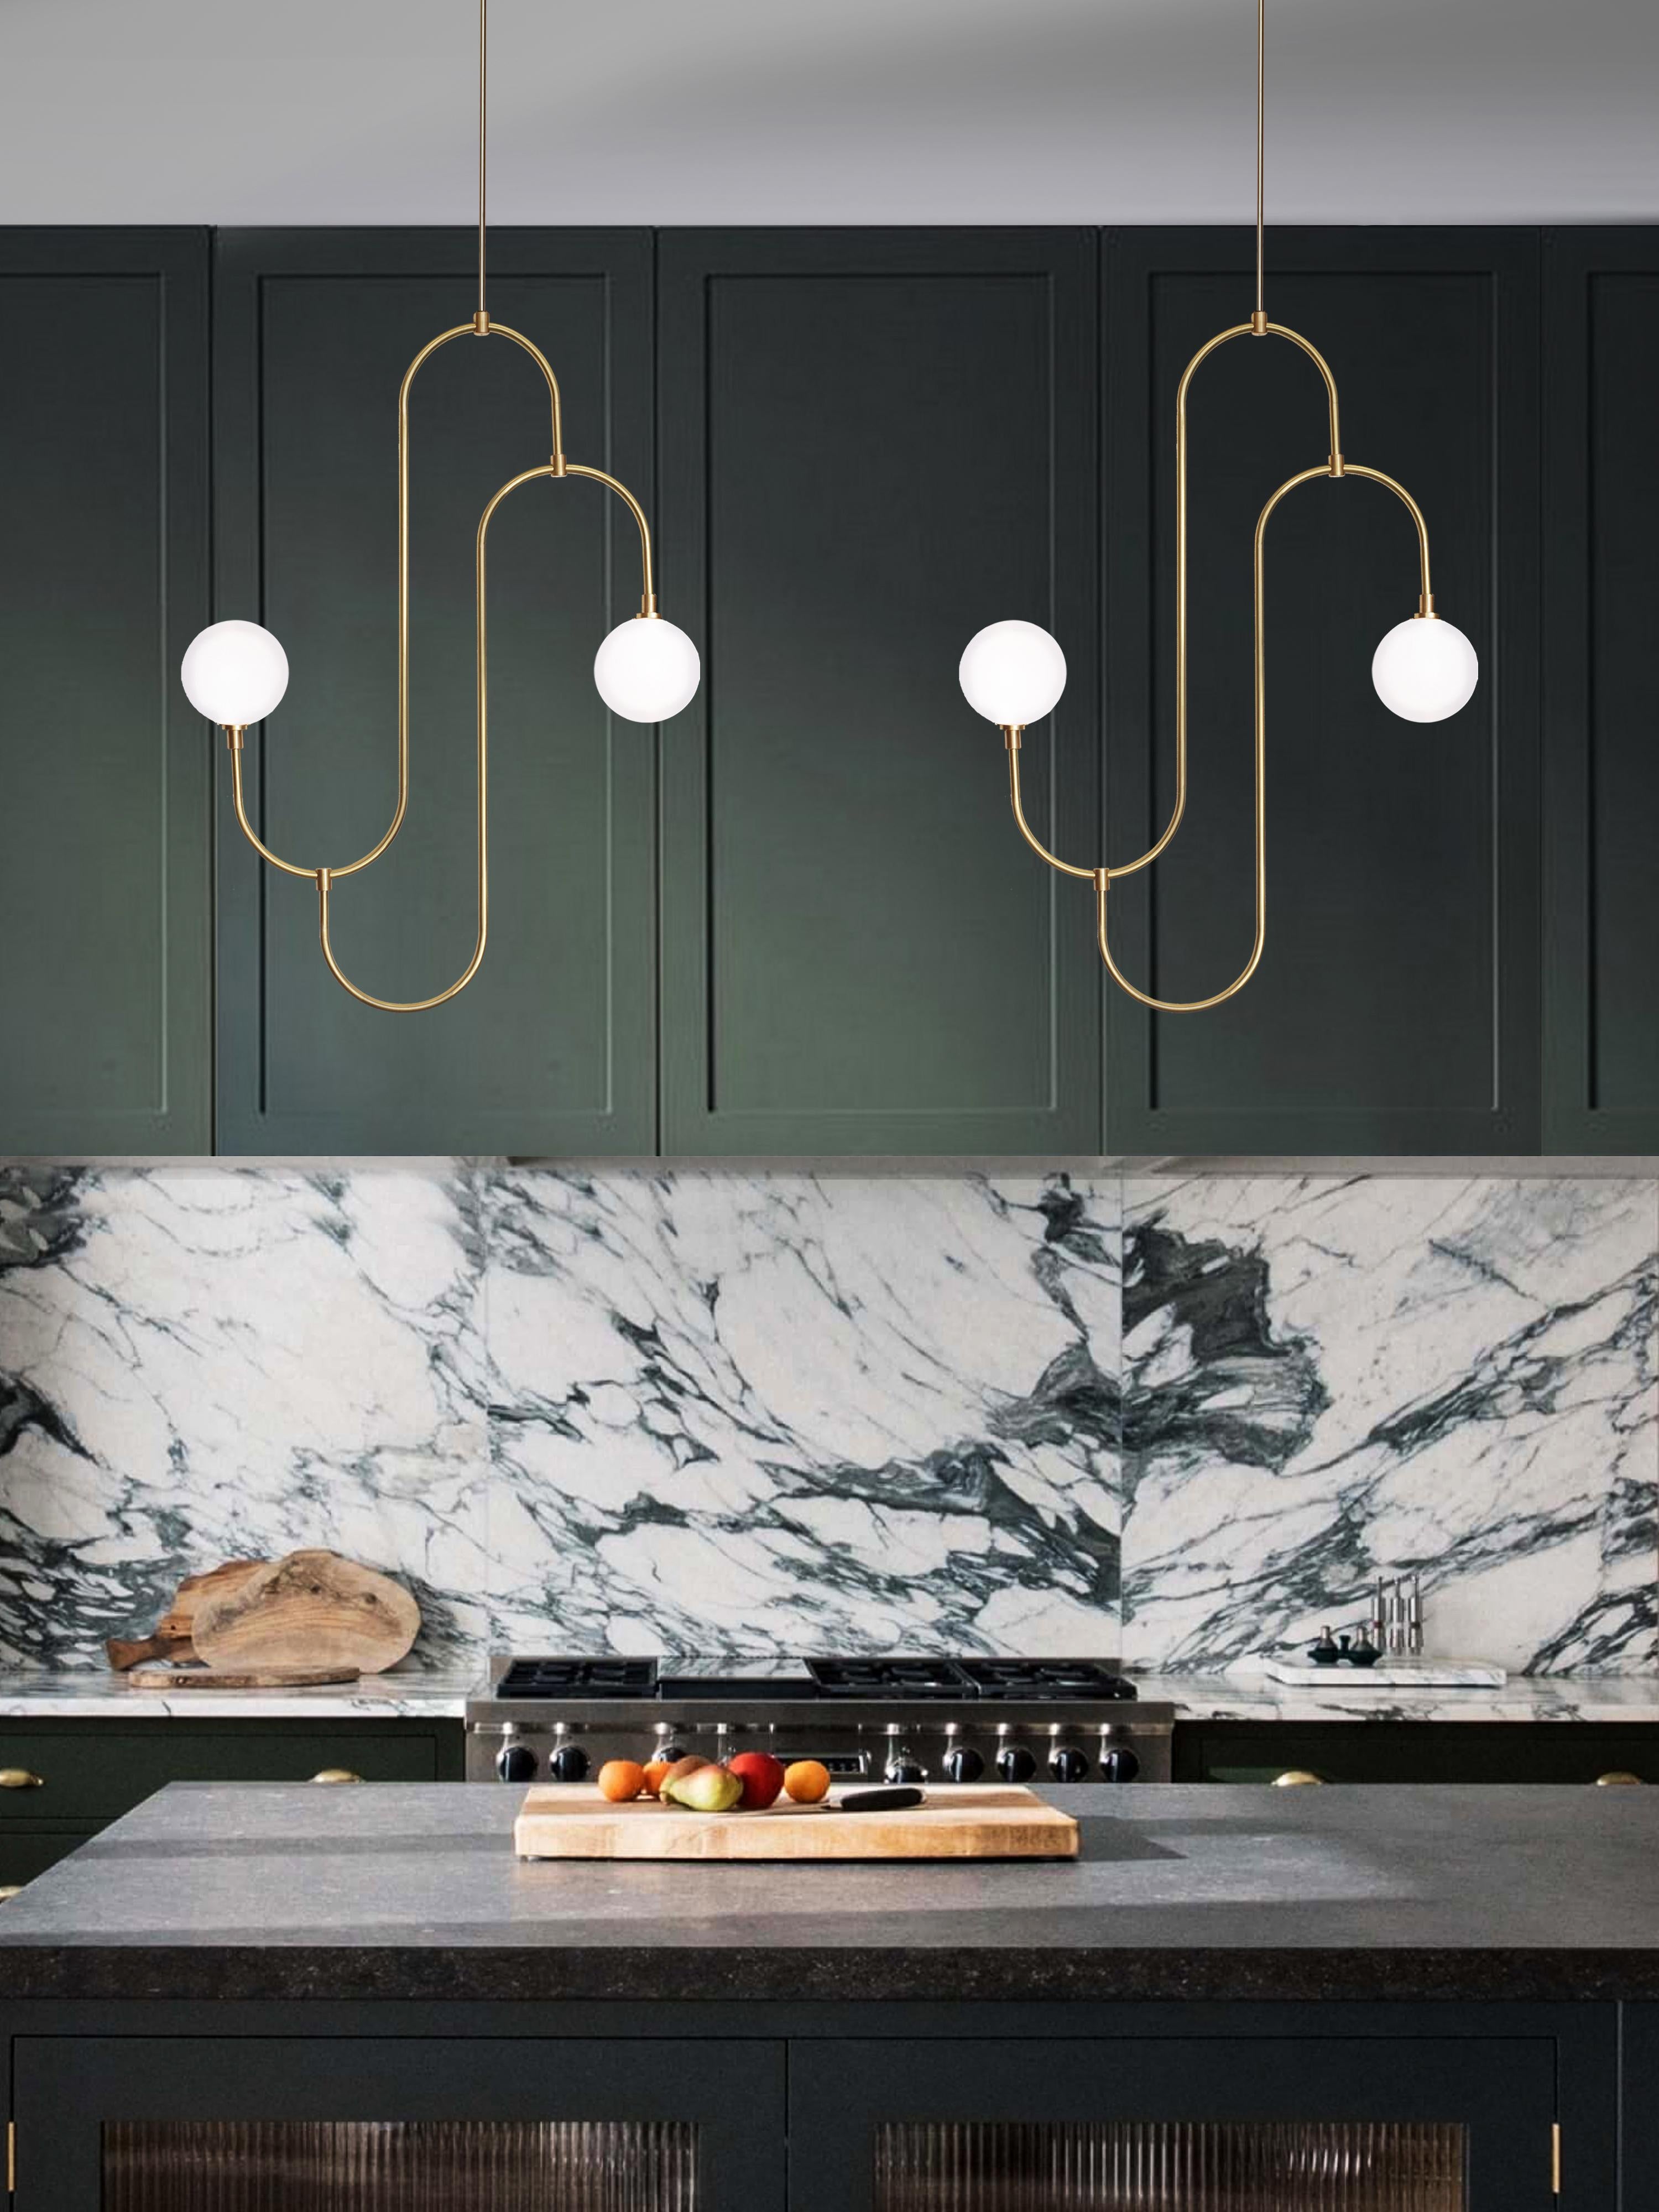 Inspired by the repeated patterns and sculptural form of 1930s jewelry design. The pendant incorporates hand bent brass arms that hold pearl white crystal glass, creating a decorative, functional lighting feature. 

G12 LED bulb
Lumens: